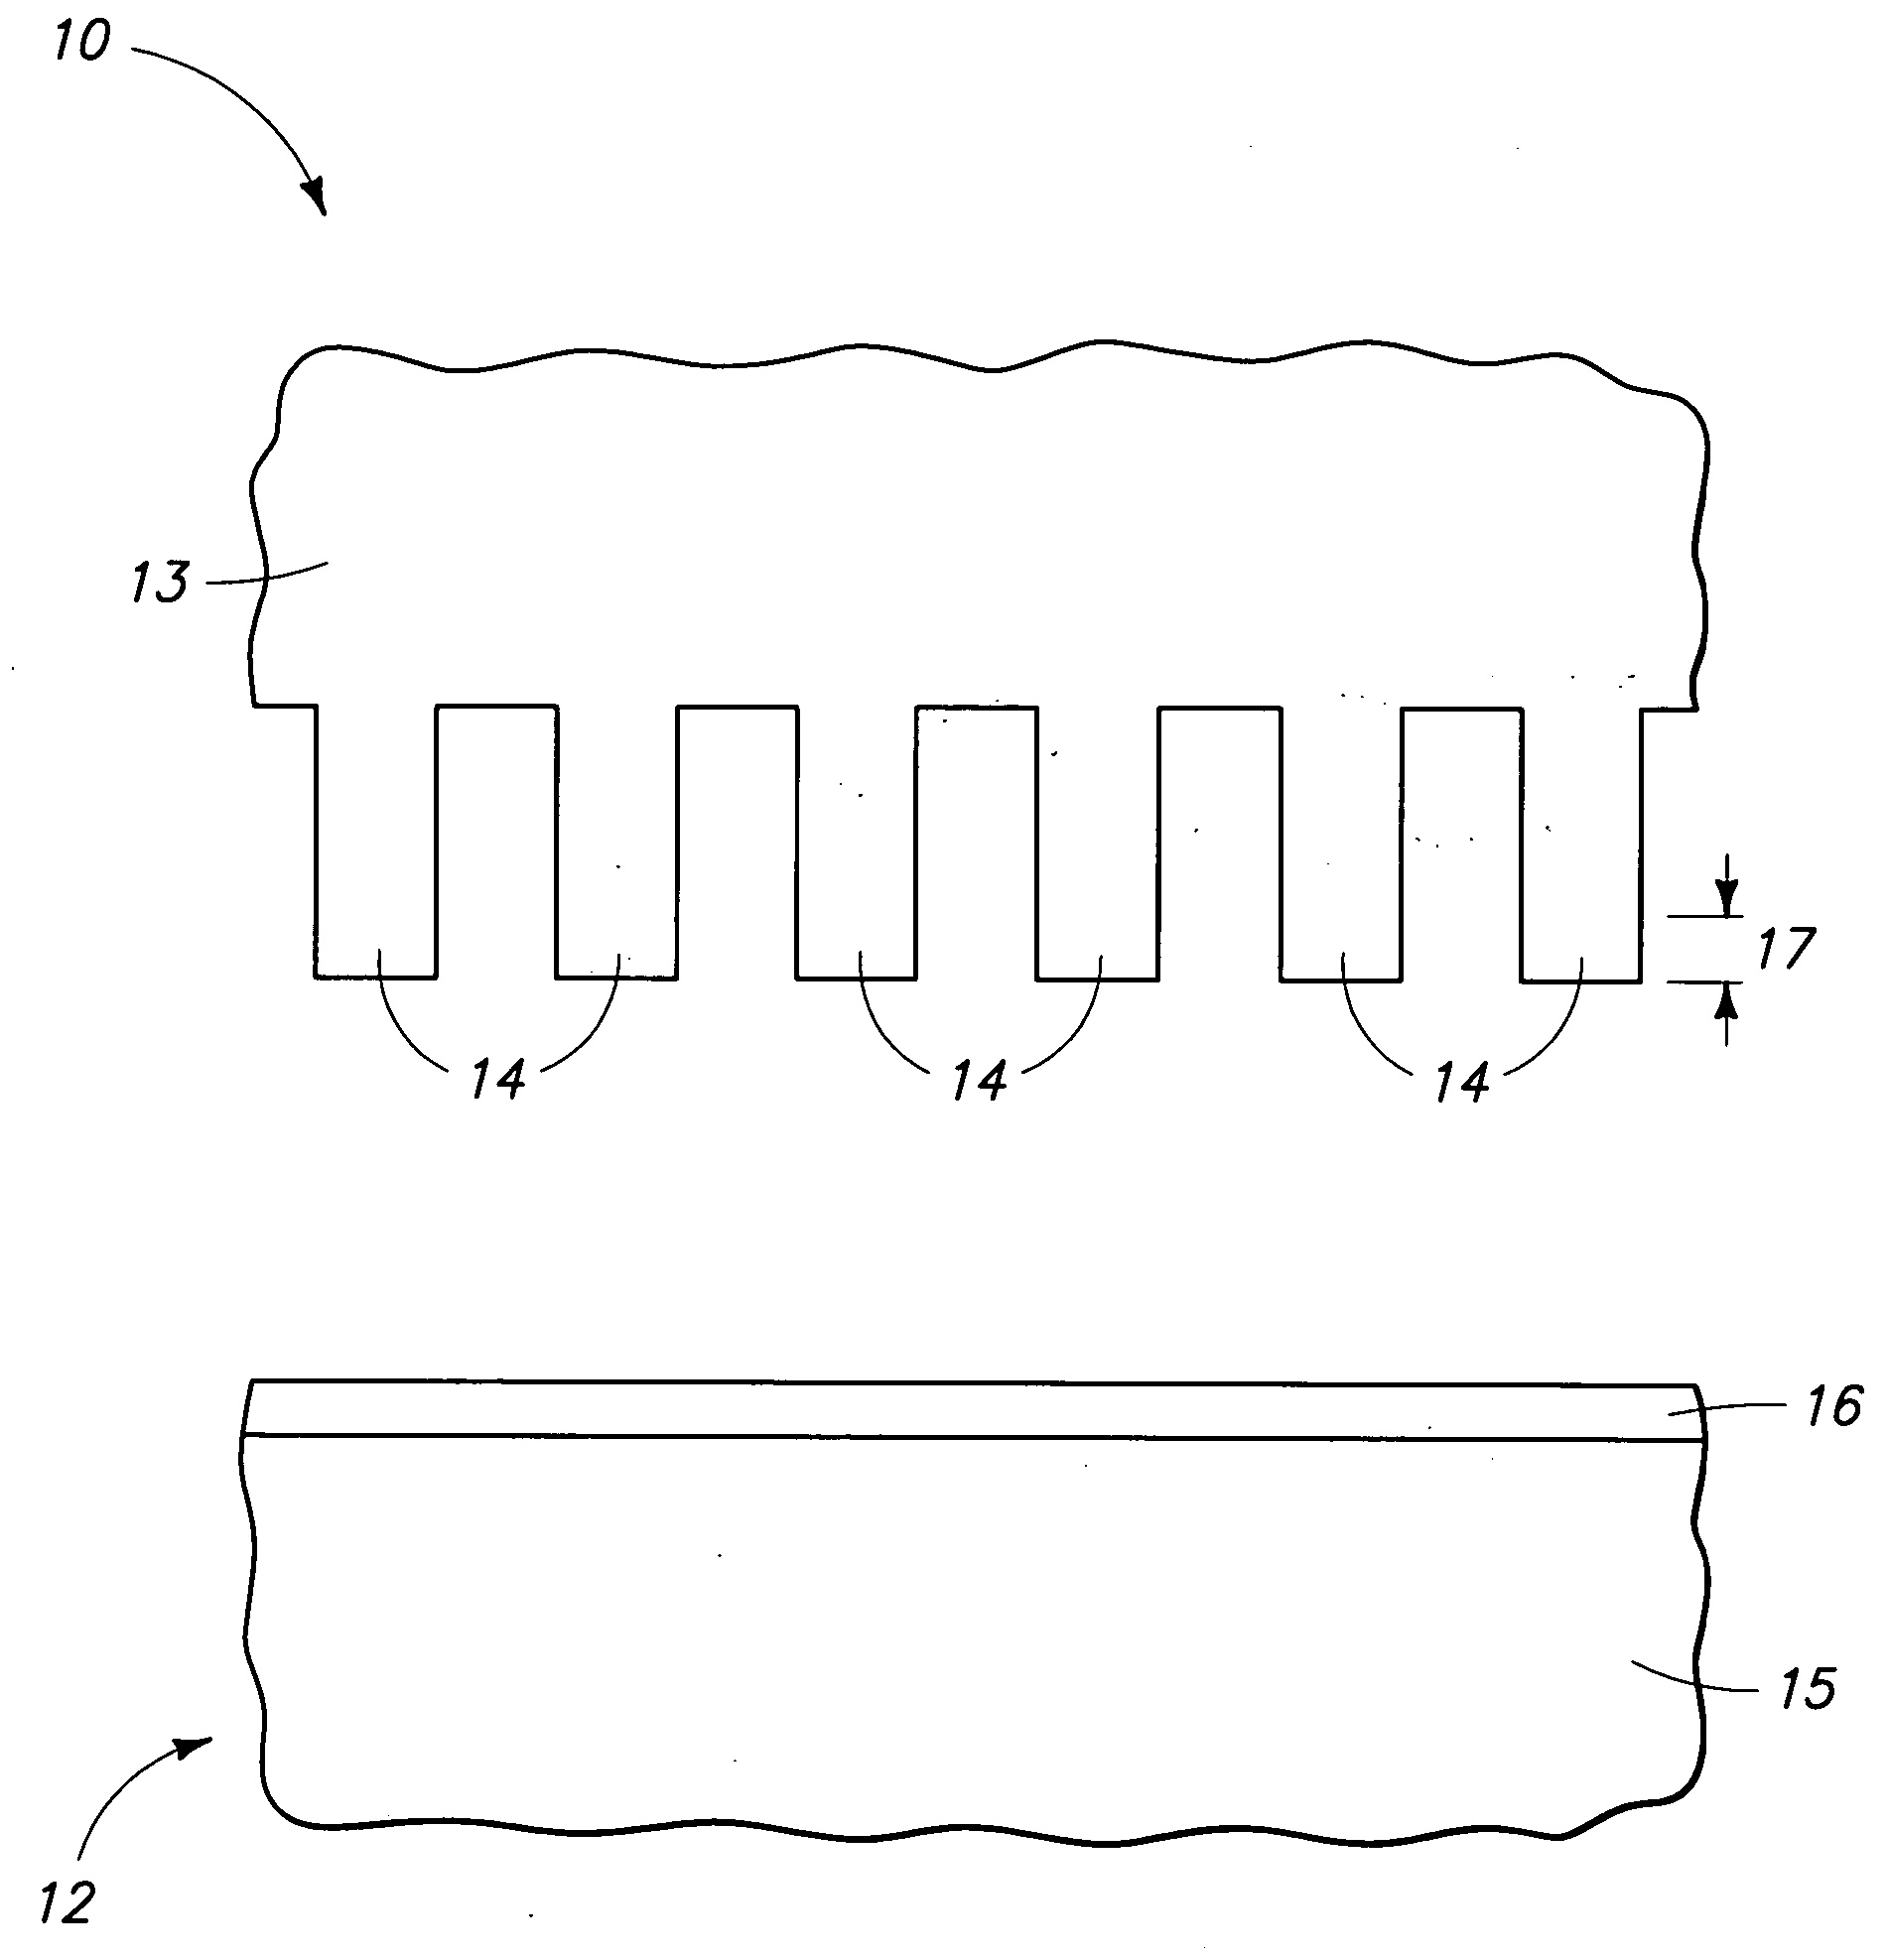 Imprint templates for imprint lithography, and methods of patterning a plurality of substrates